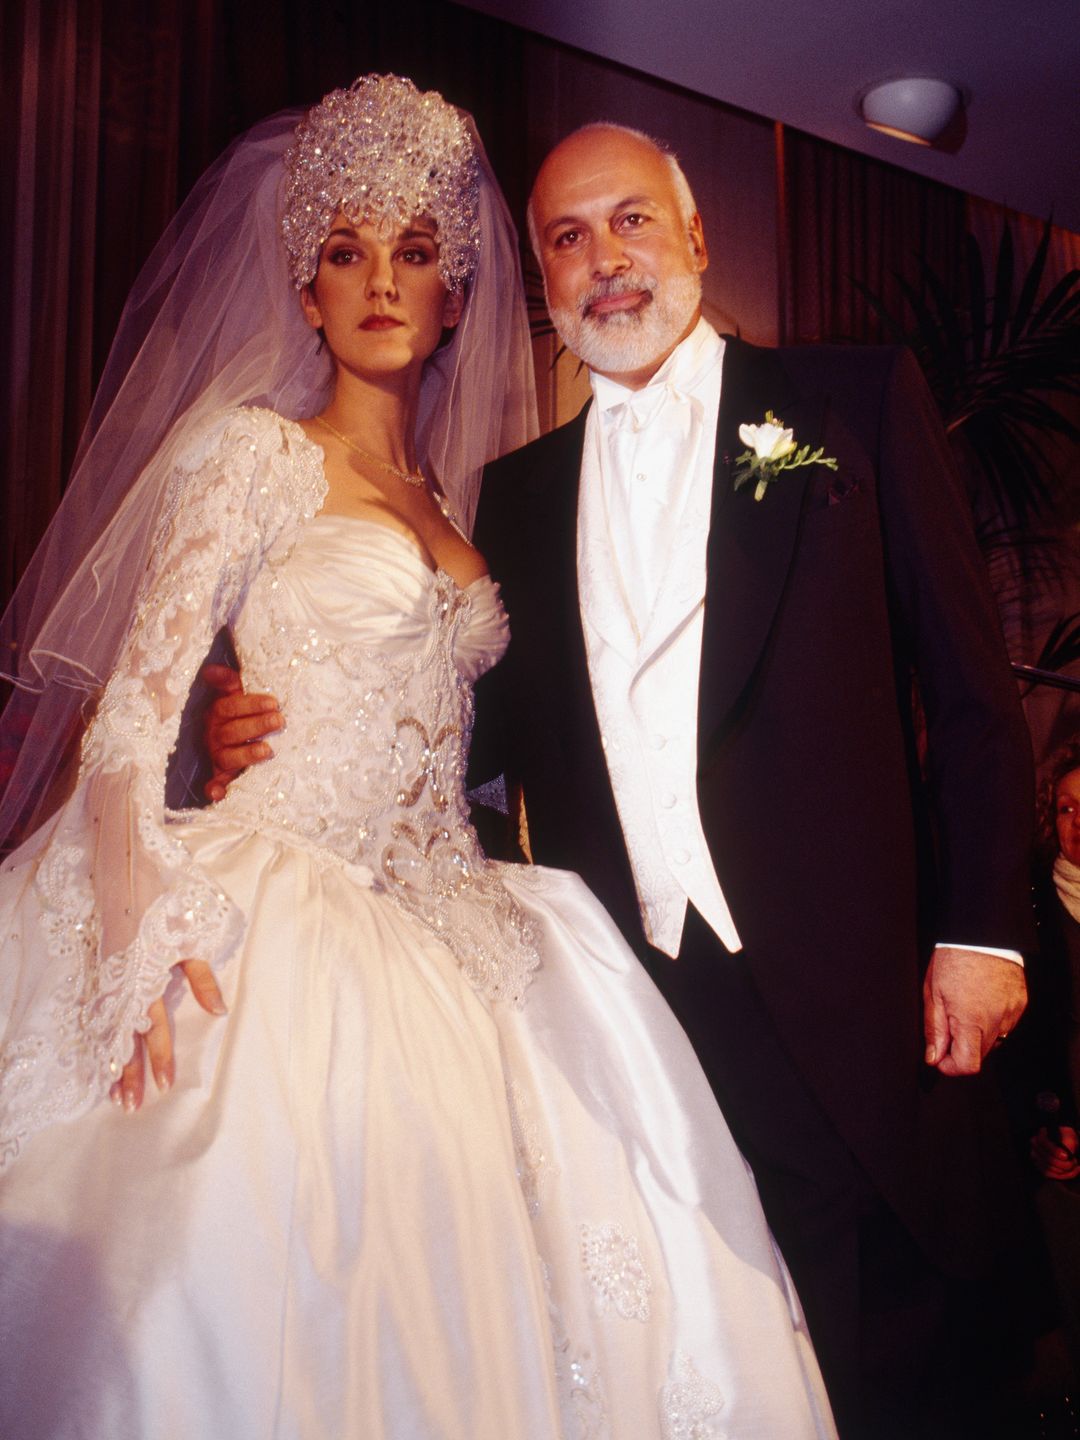 Record producer Rene Angelil and Canadian singer Celine Dion during their wedding ceremony. (Photo by Laurence  Labat/Sygma via Getty Images)